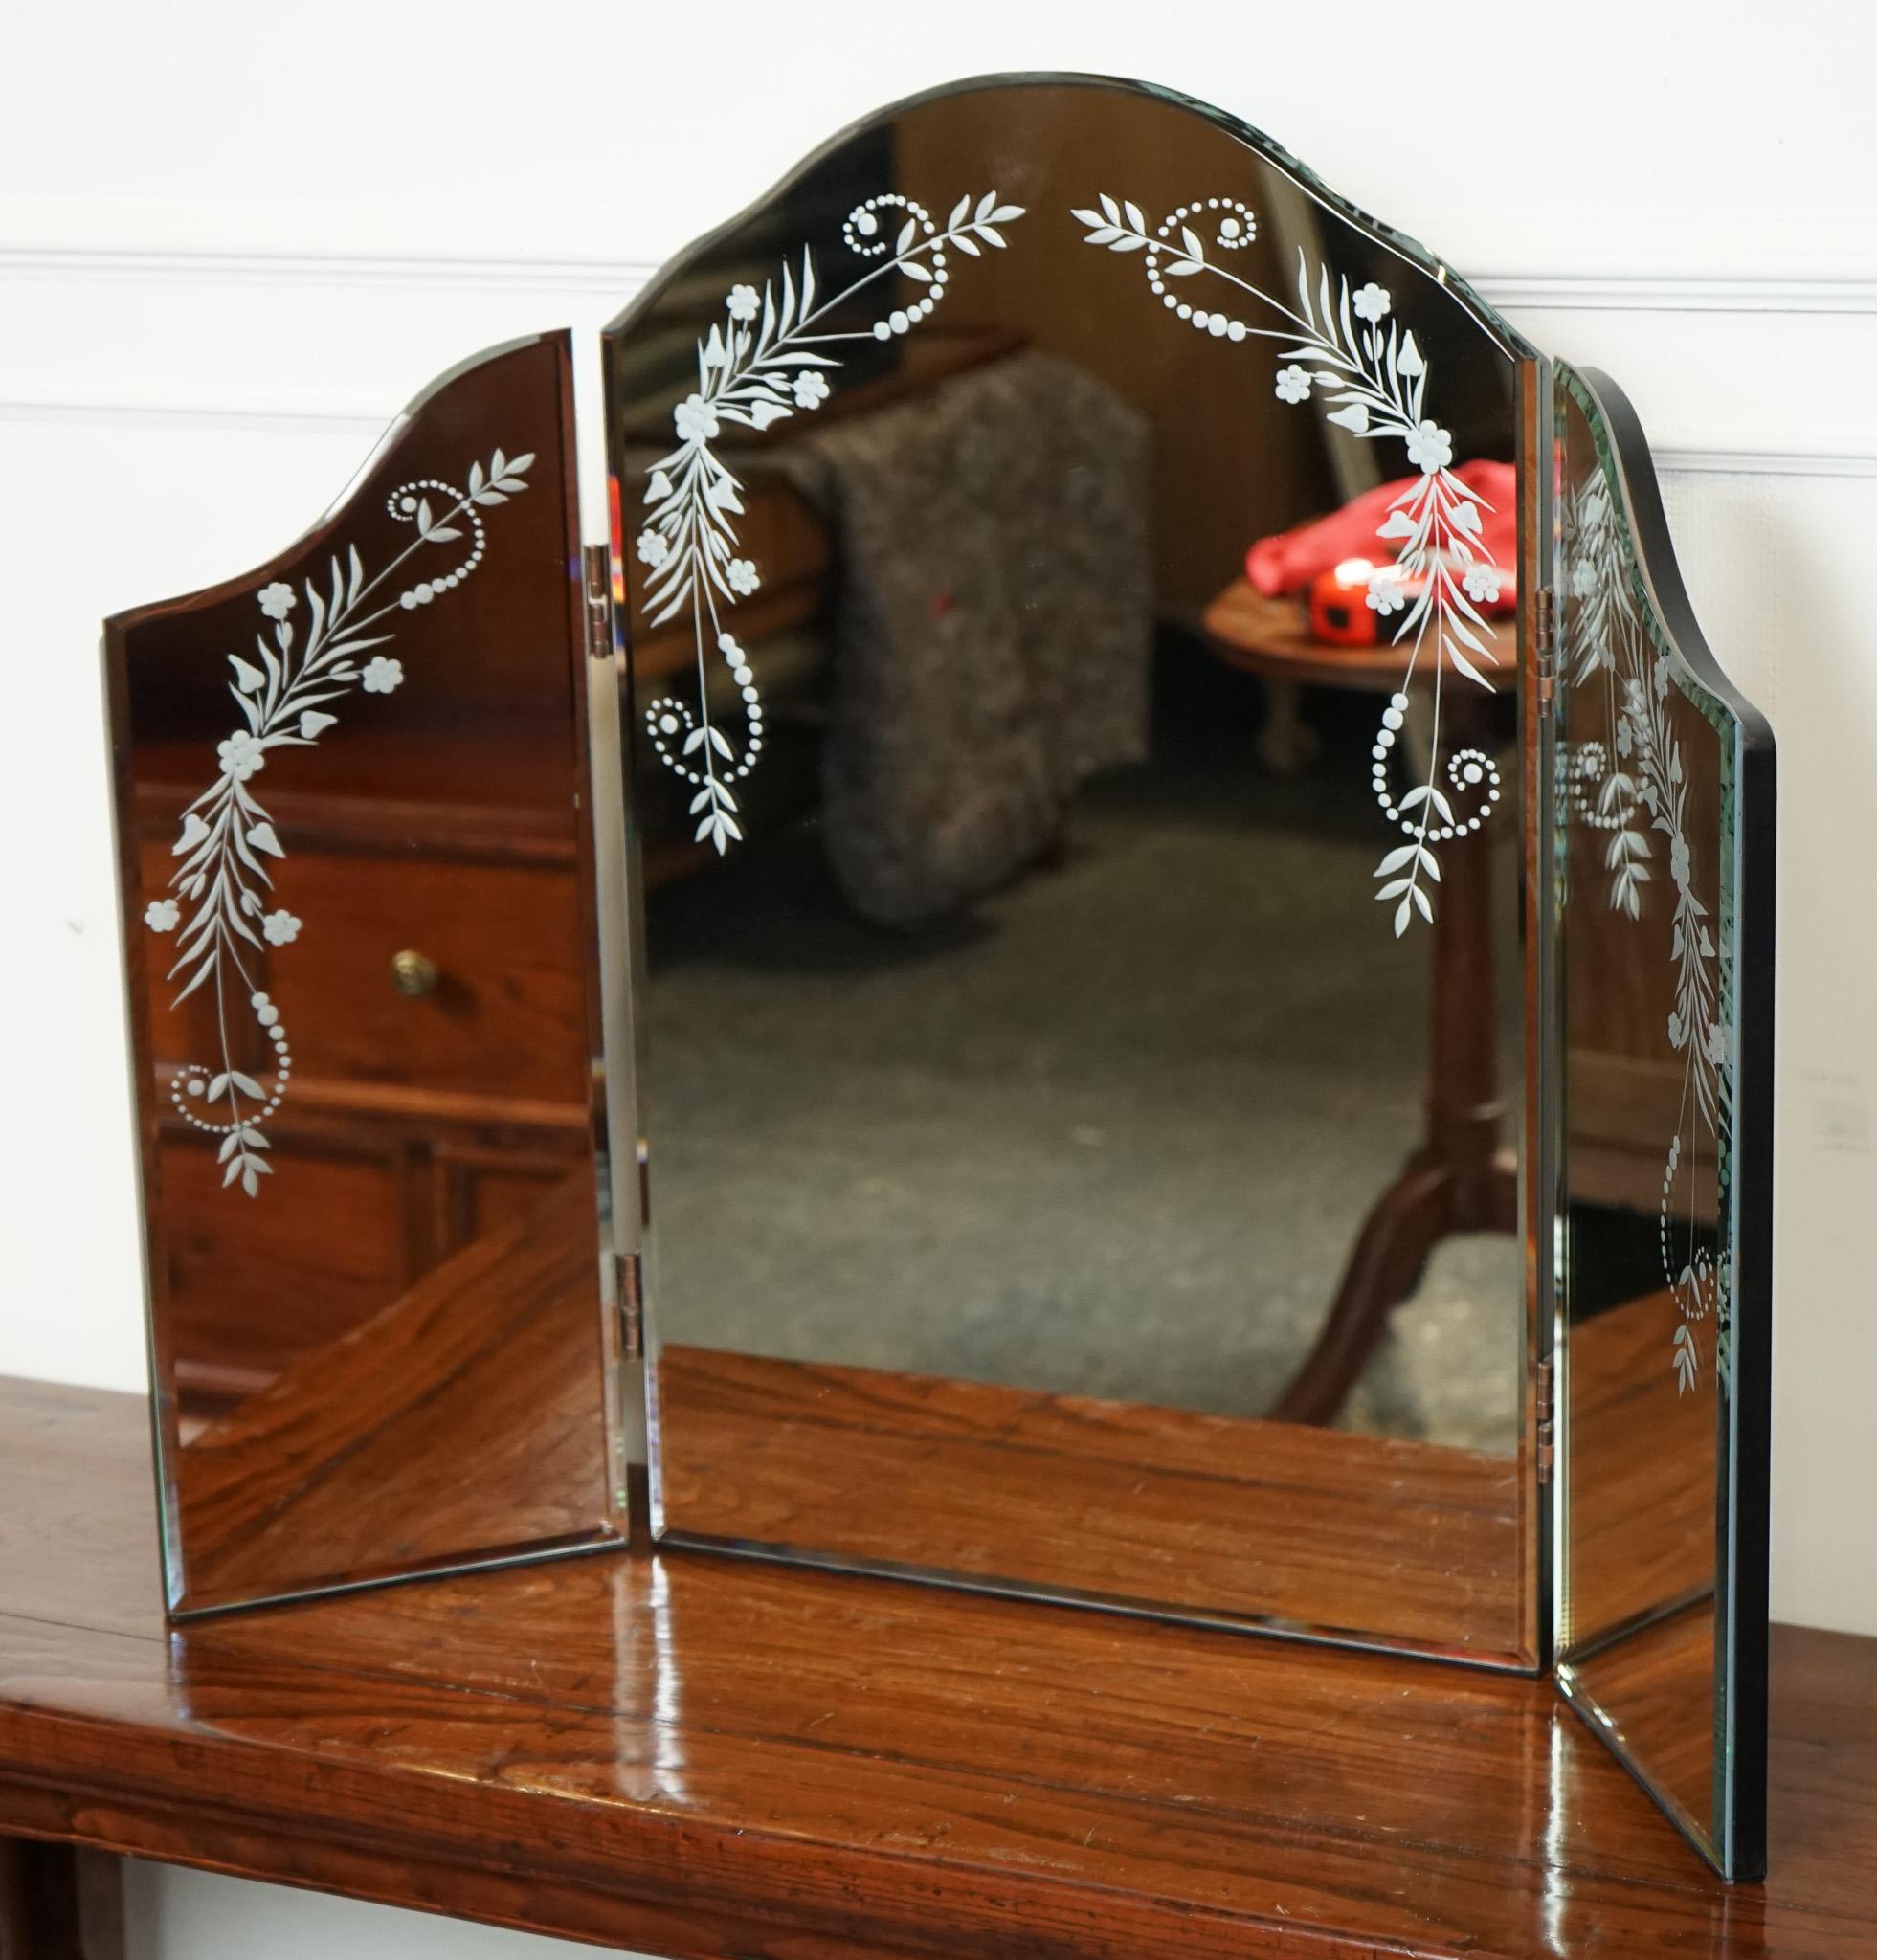 We are delighted to offer for sale this Laura Ashley Trifold Venetian Trifold Mirror.

These mirrors are designed to put on a dressing table, but can pretty much be placed anywhere you desire.

Please carefully examine the pictures to see the